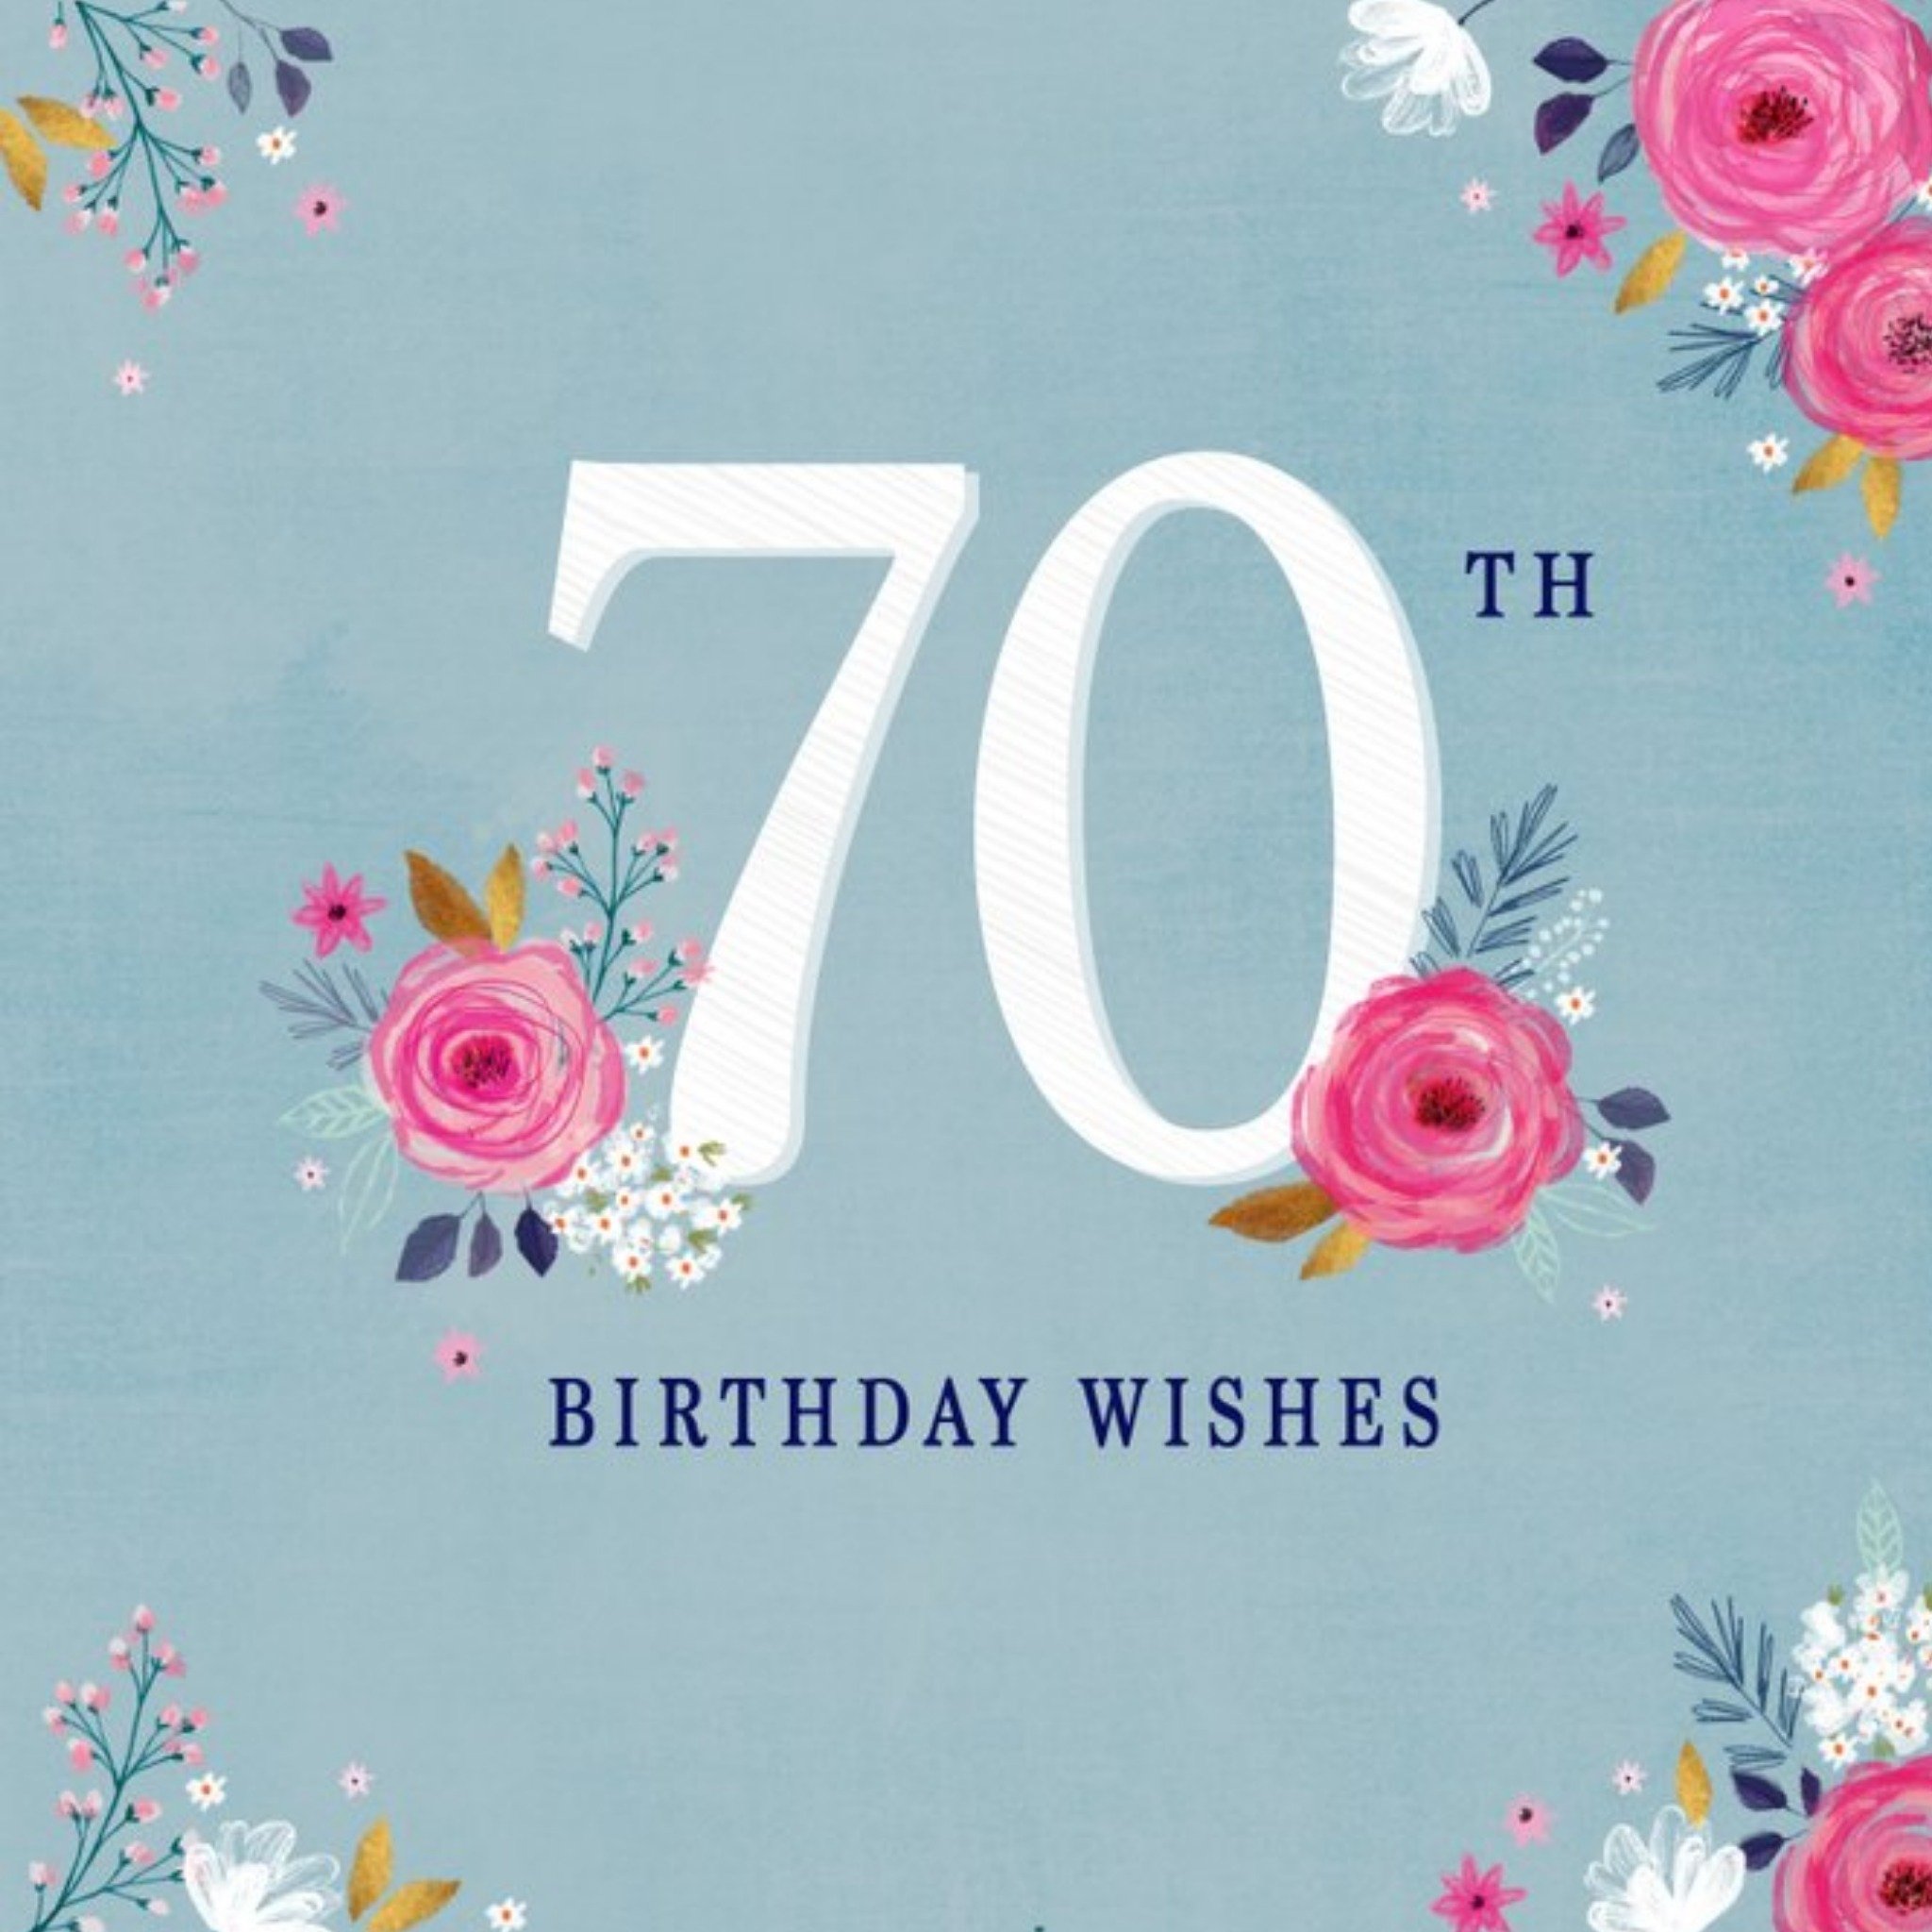 Moonpig Typographic Design Floral 70th Birthday Wishes Card, Square